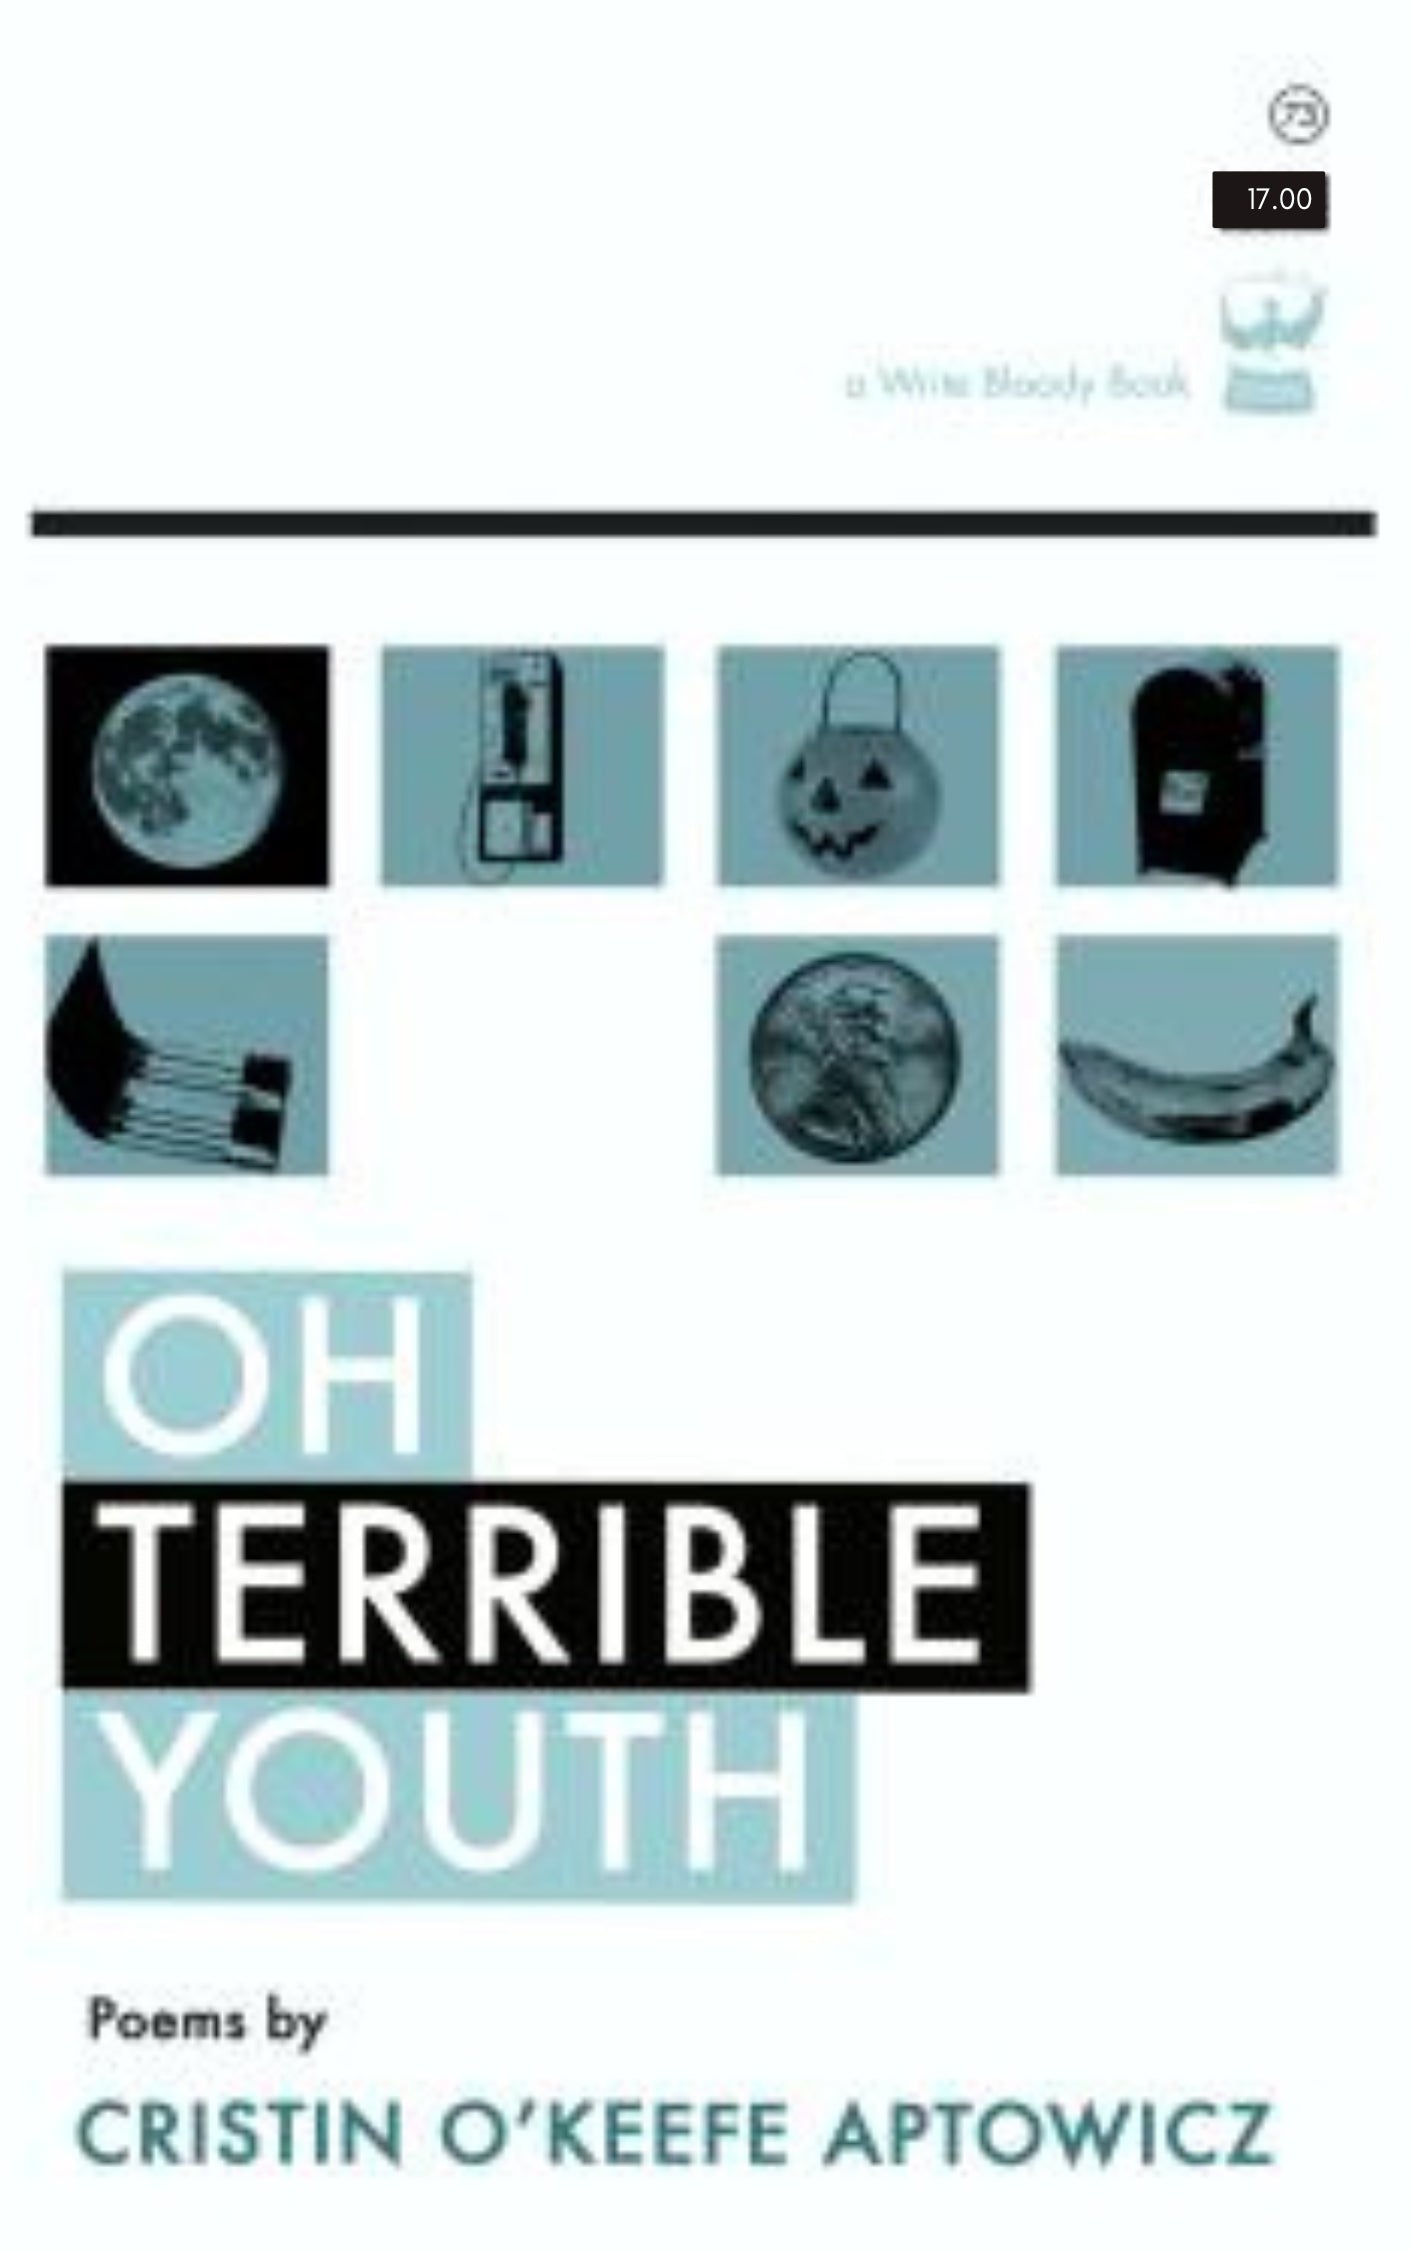 Oh, Terrible Youth by Cristin O’Keefe Aptowicz